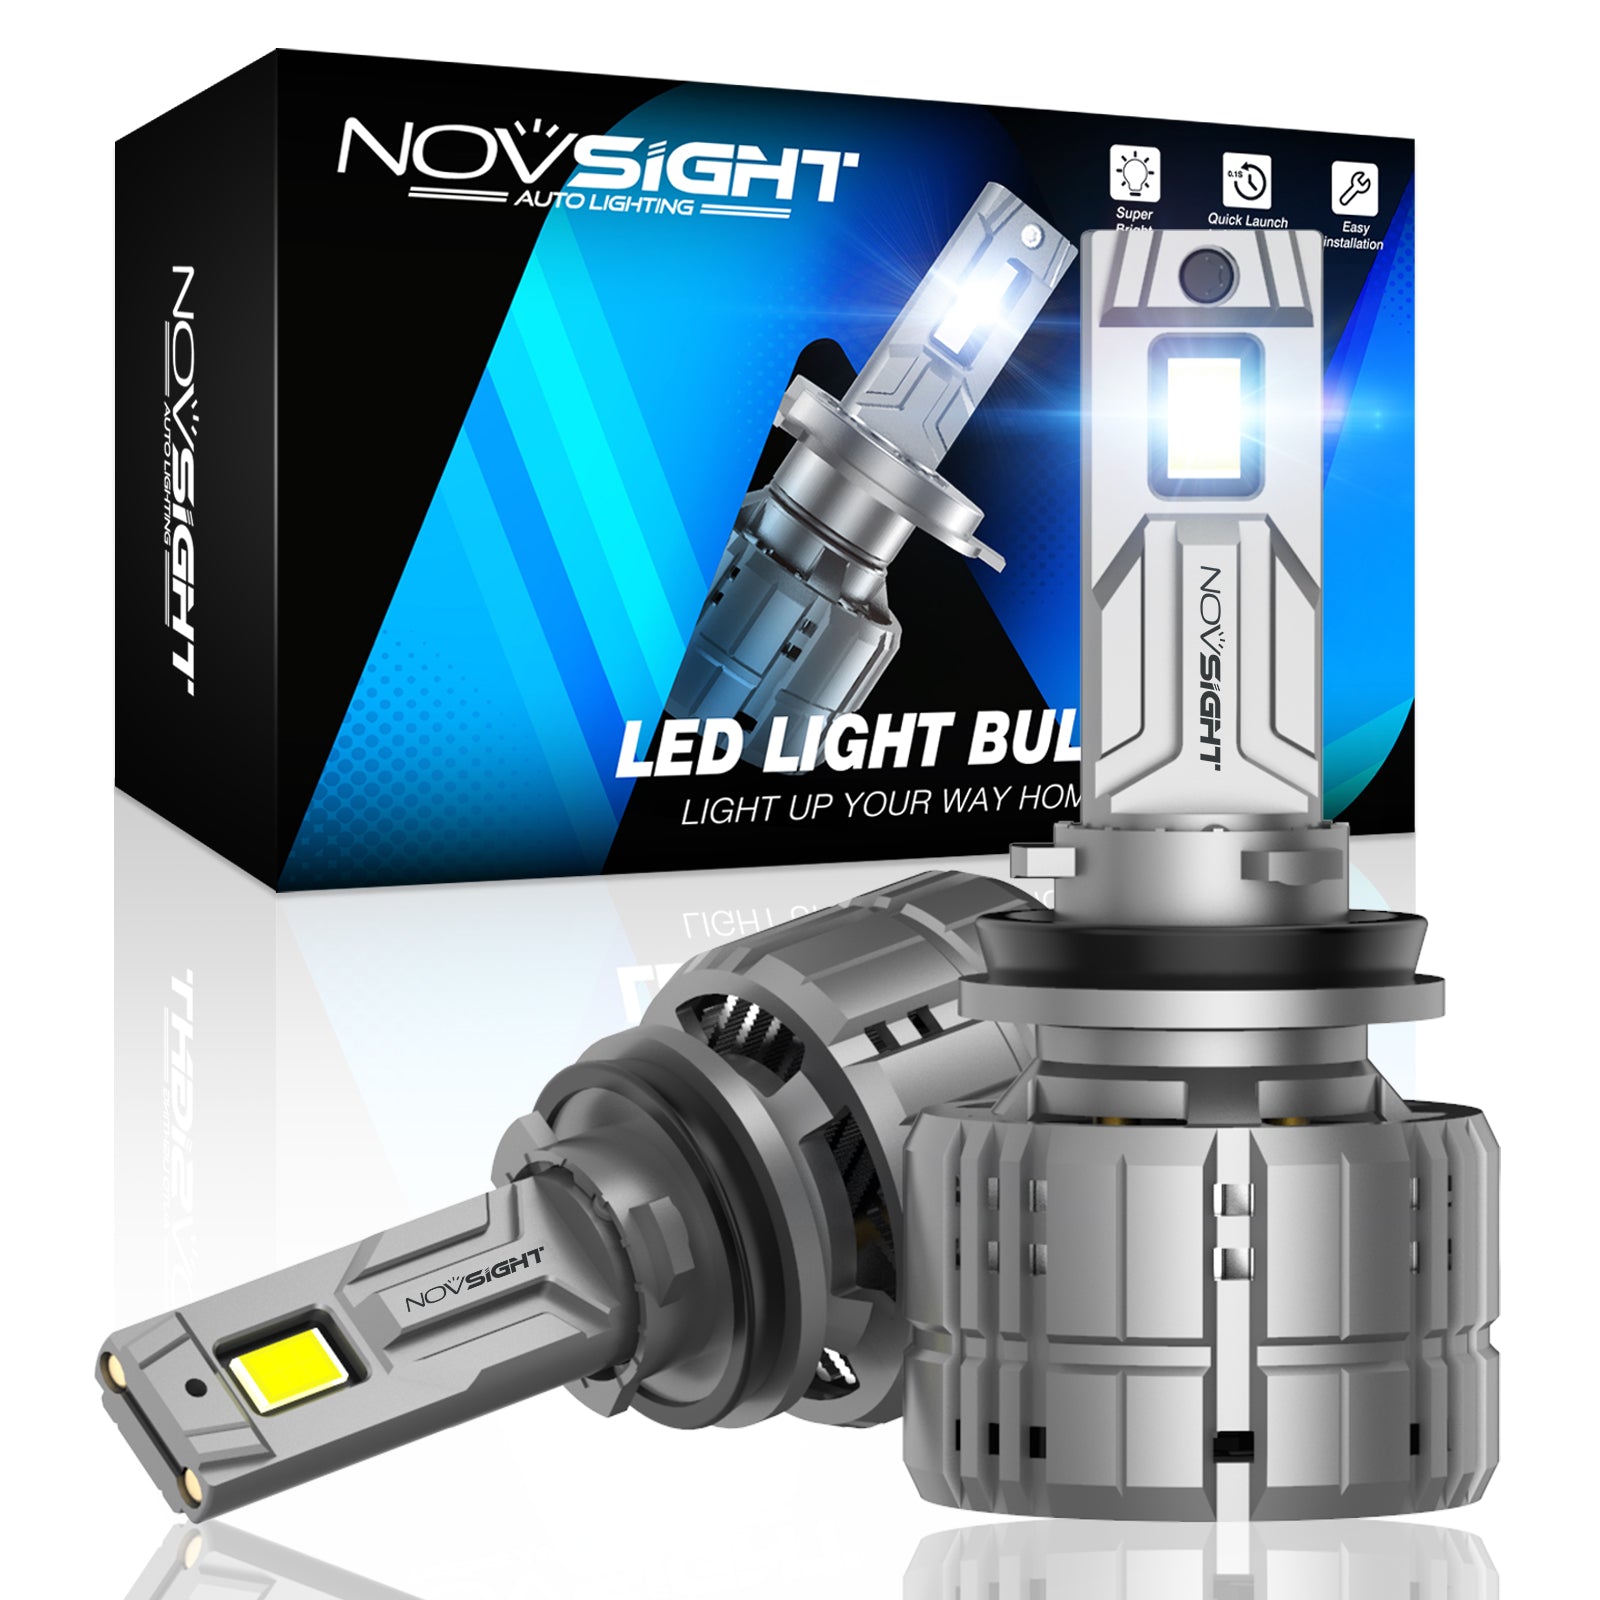 Pro Series 200W Brightest LED Bulbs for Car SUV ROAD.Try get more discounts! – Novsight